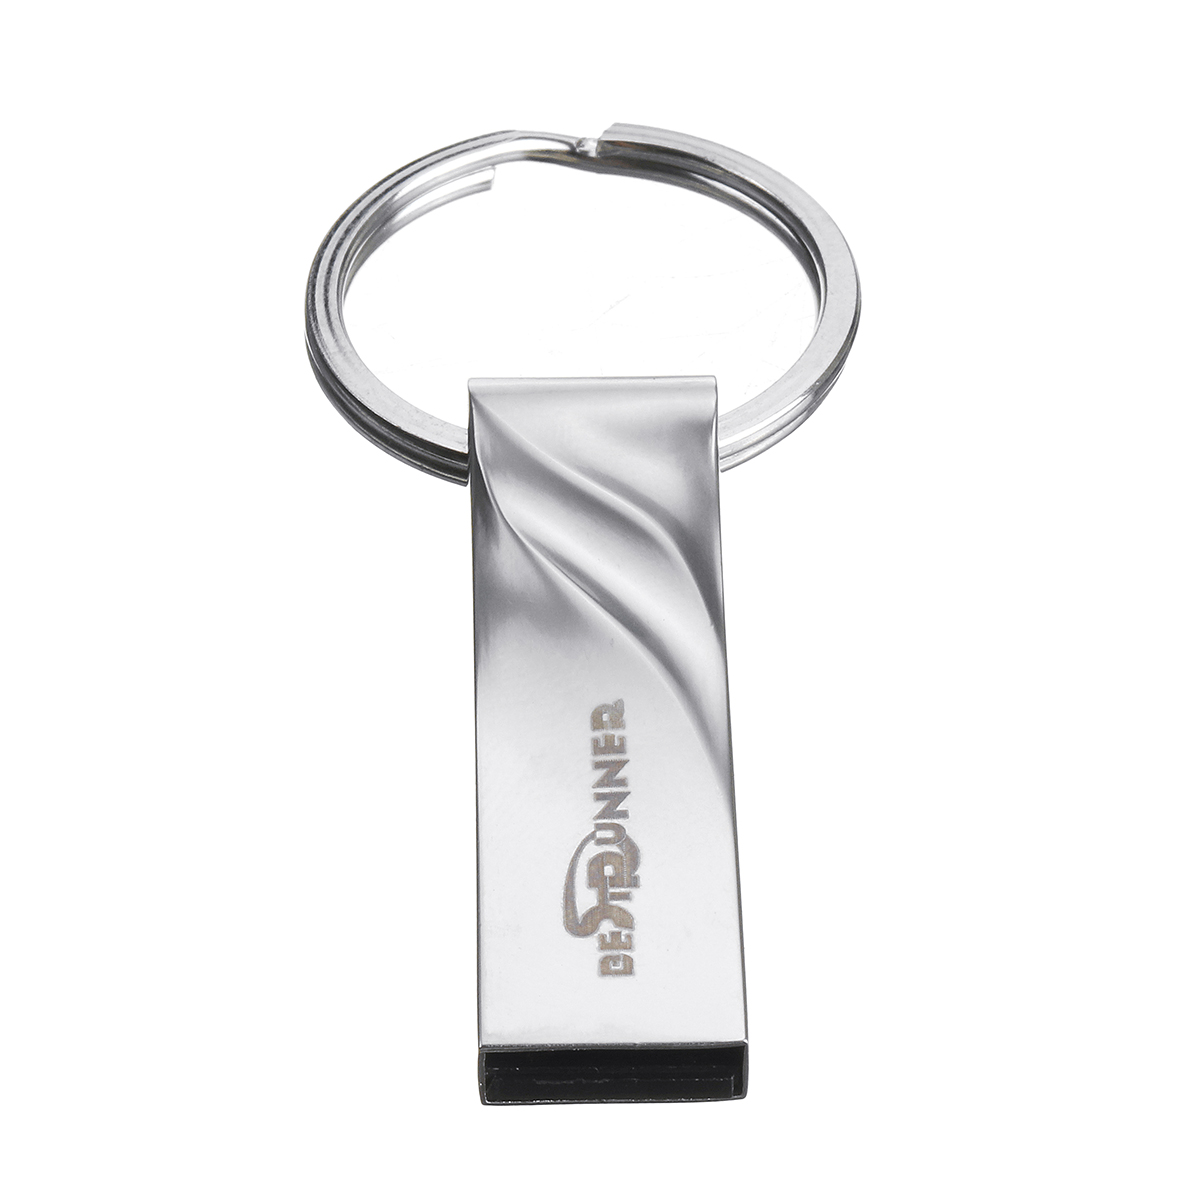 Find 16/32GB USB 2 0 Flash Drive Metal Flash Memory Card USB Stick Pen Drive U Disk for Sale on Gipsybee.com with cryptocurrencies